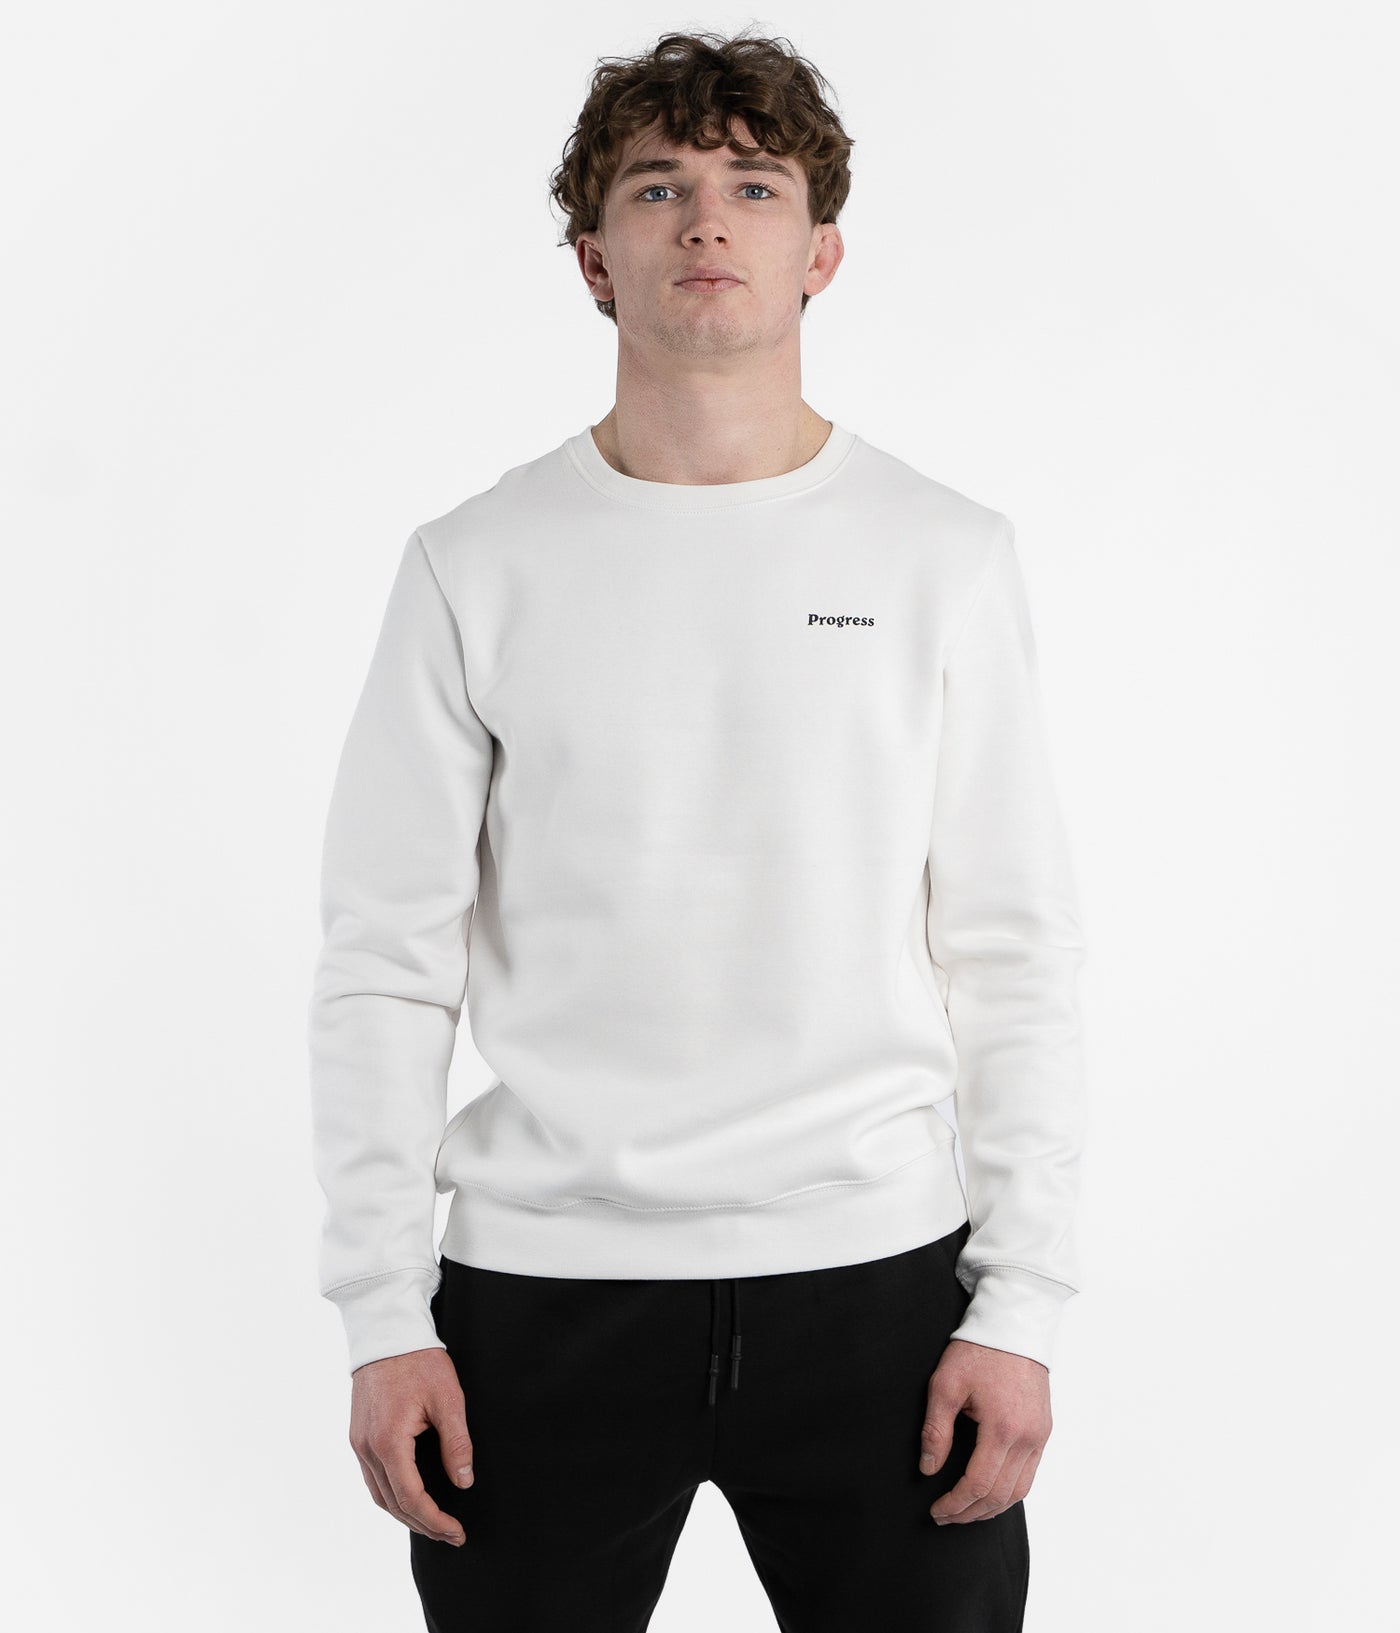 What makes the Unknown Great Wave Crewneck awesome?